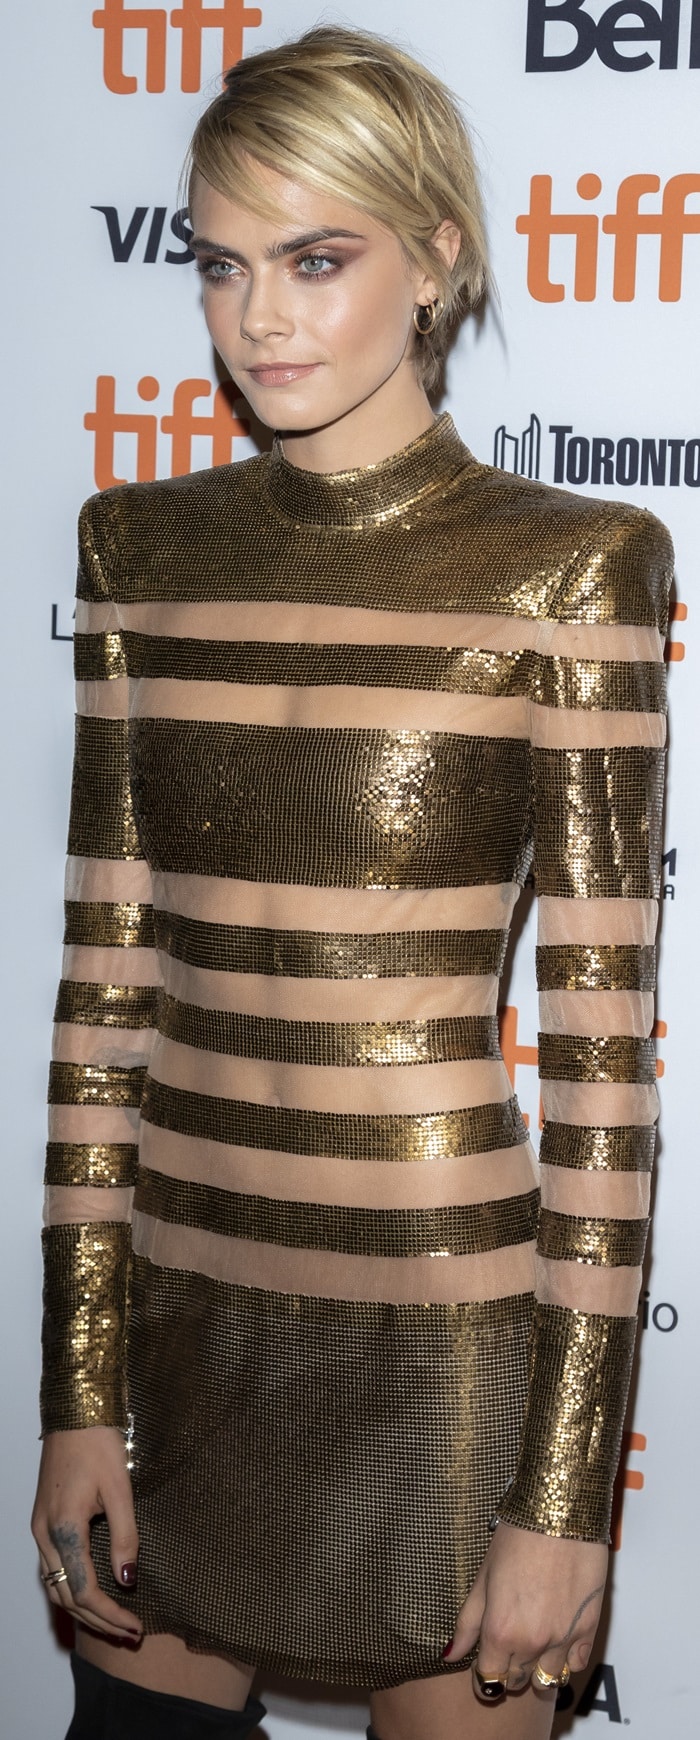 Cara Delevingne in a gold metallic mini dress from the Balmain Fall 2018 Collection